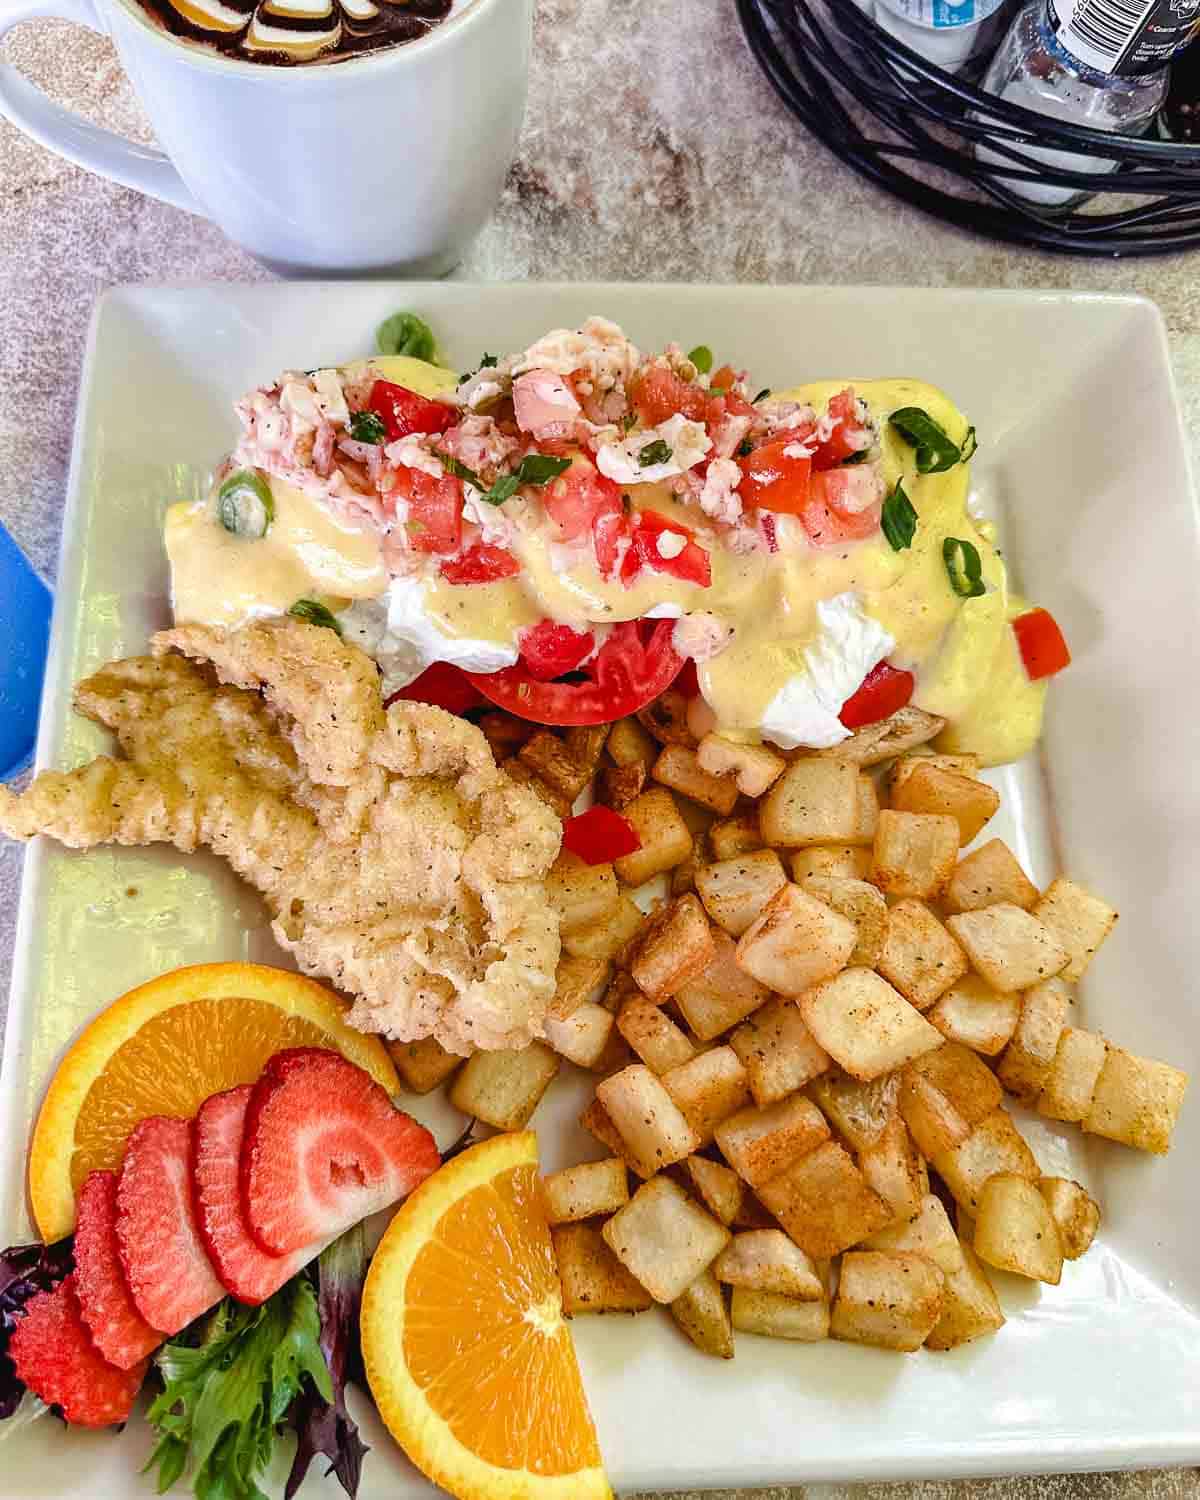 Eggs, conch and potatoes with orange and strawberry slices at Conch House Key Largo.